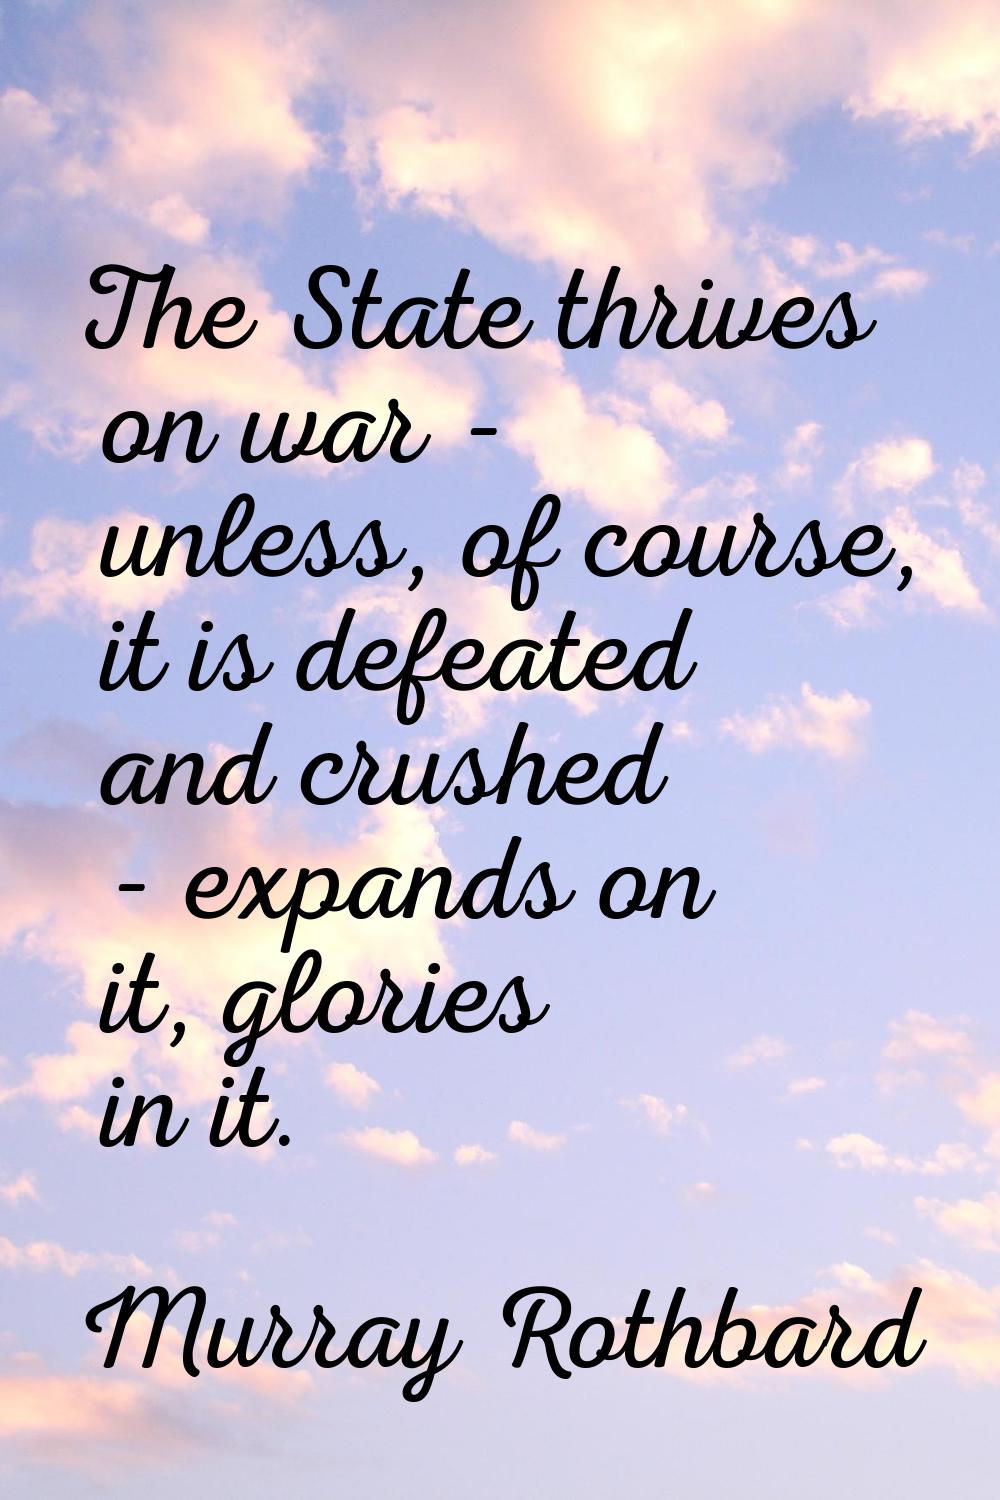 The State thrives on war - unless, of course, it is defeated and crushed - expands on it, glories i